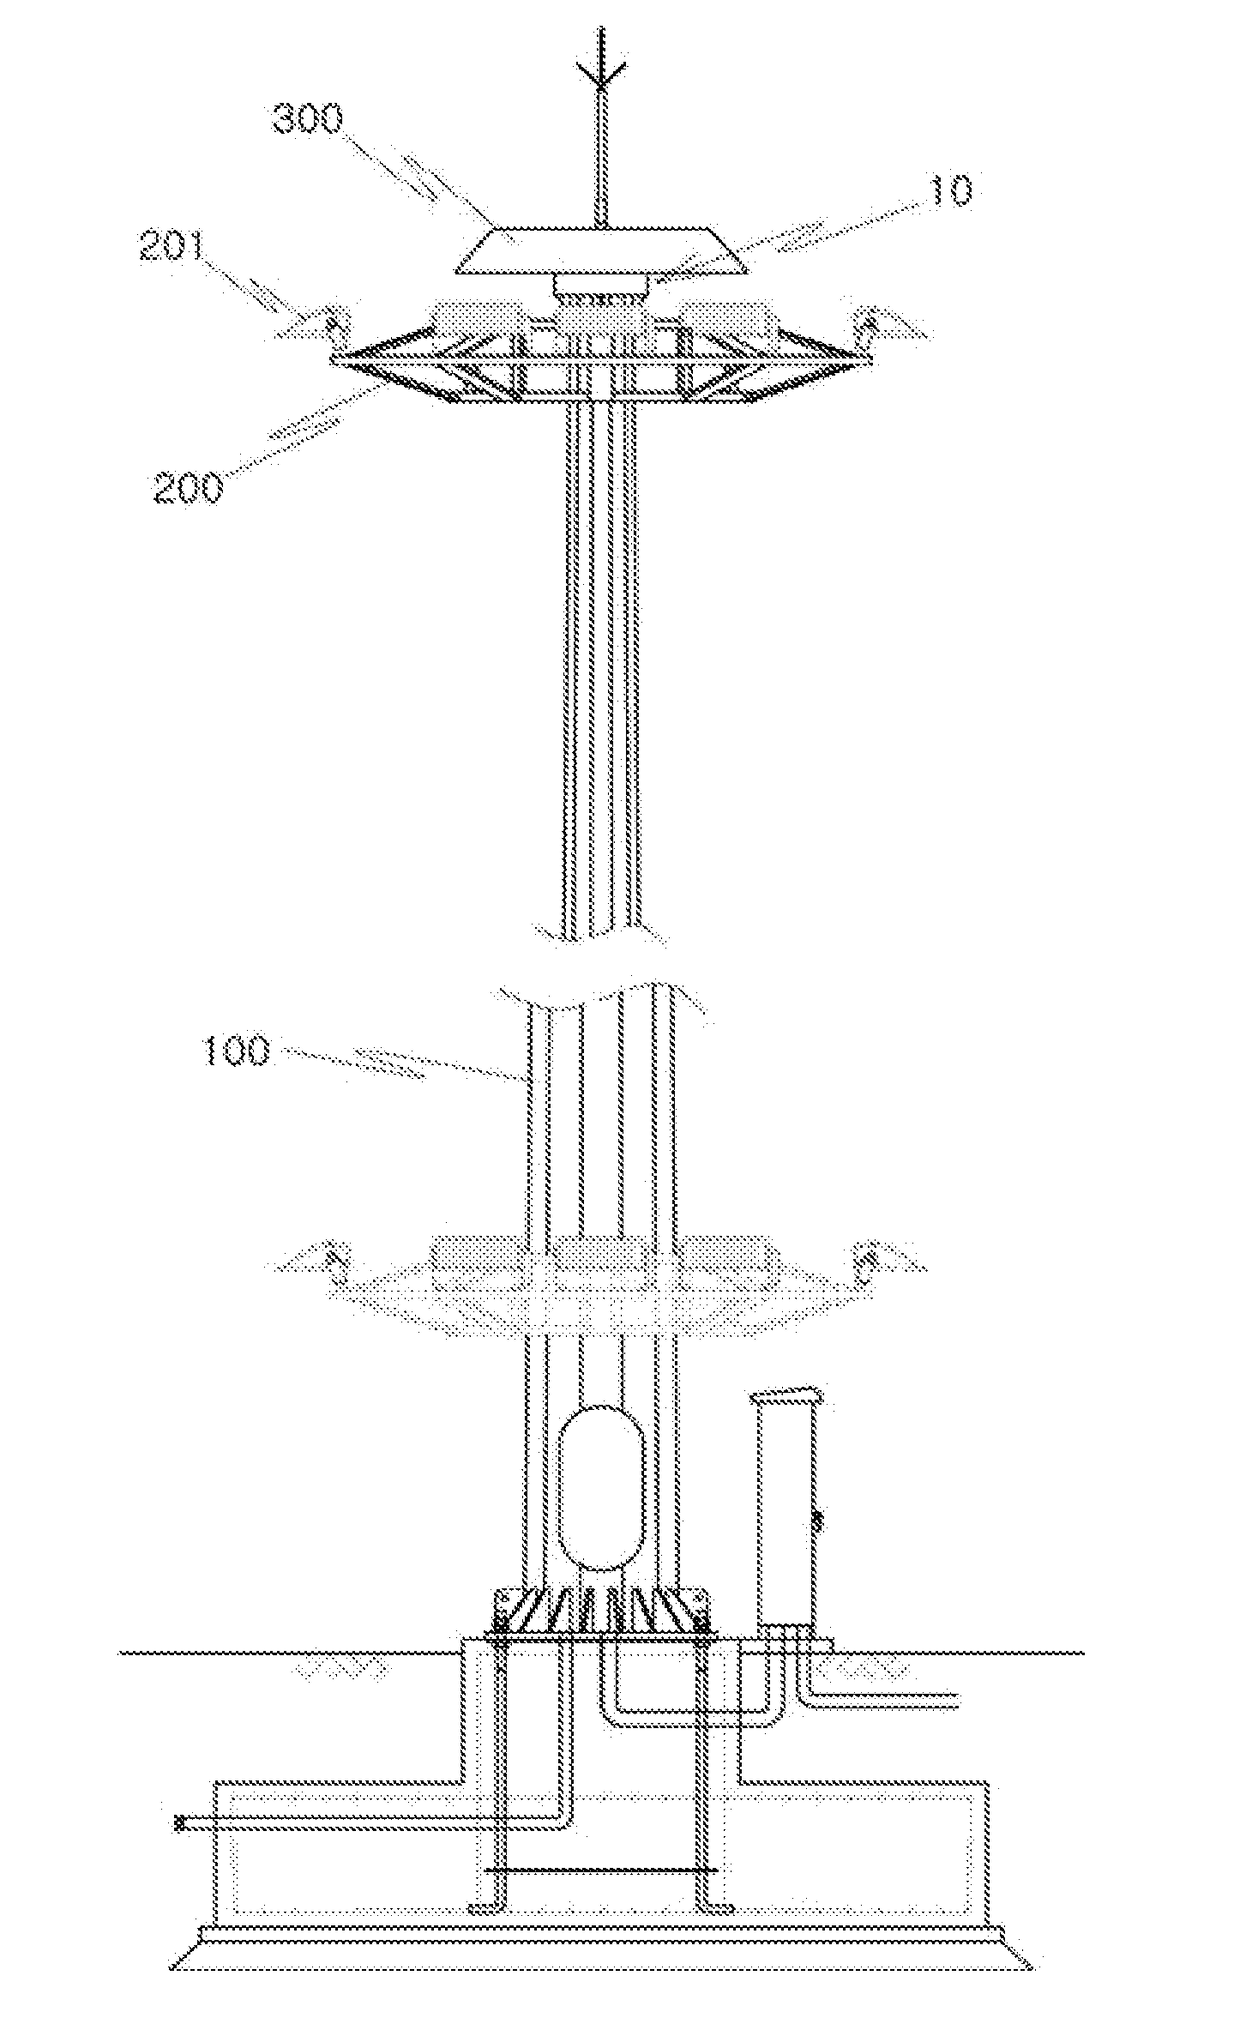 Earthquake-resistant light tower with the tuned mass damper